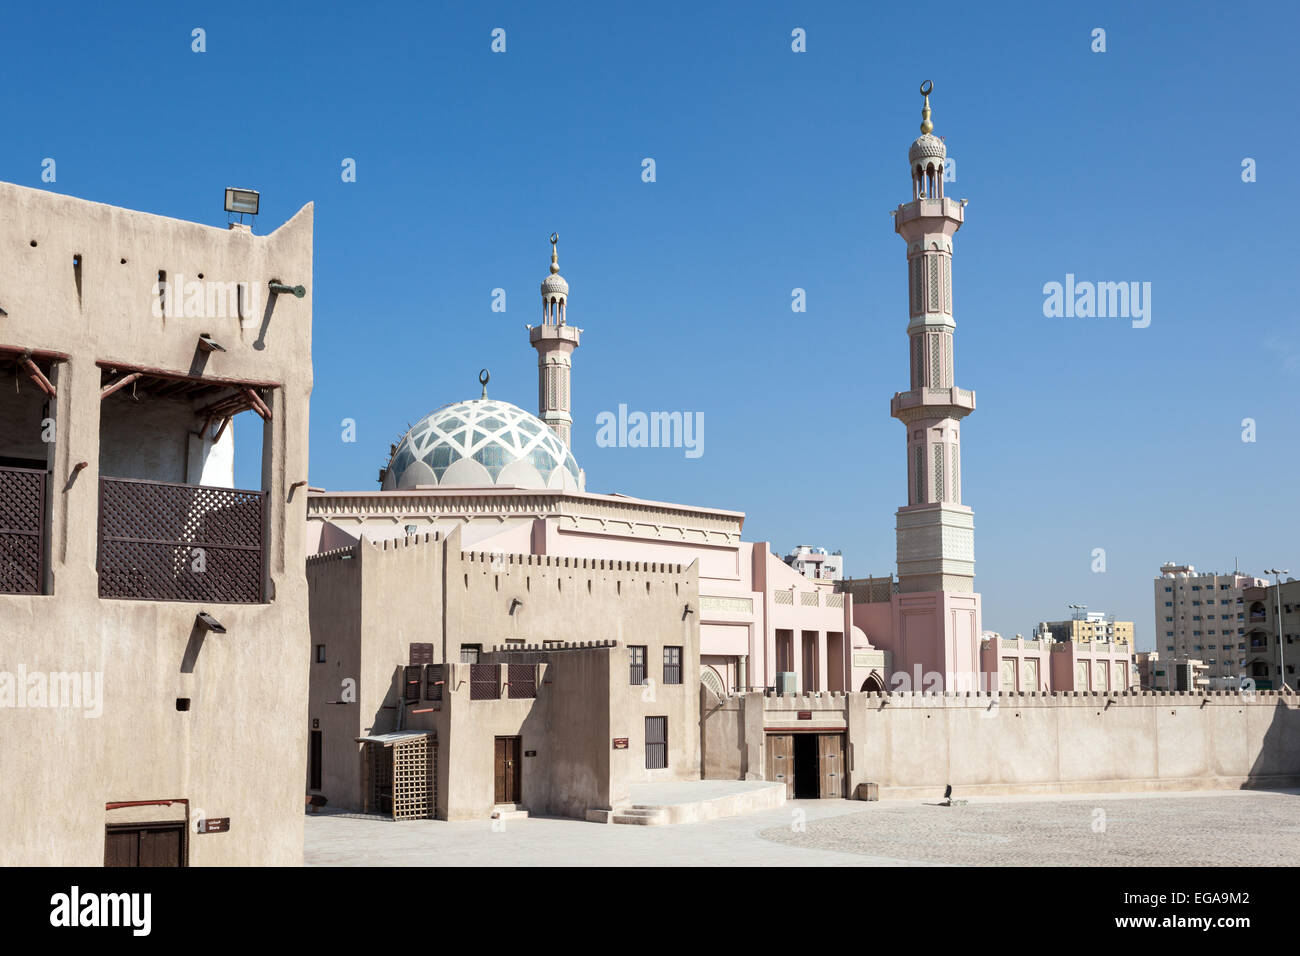 Mosque in the emirate of Ajman, United Arab Emirates Stock Photo